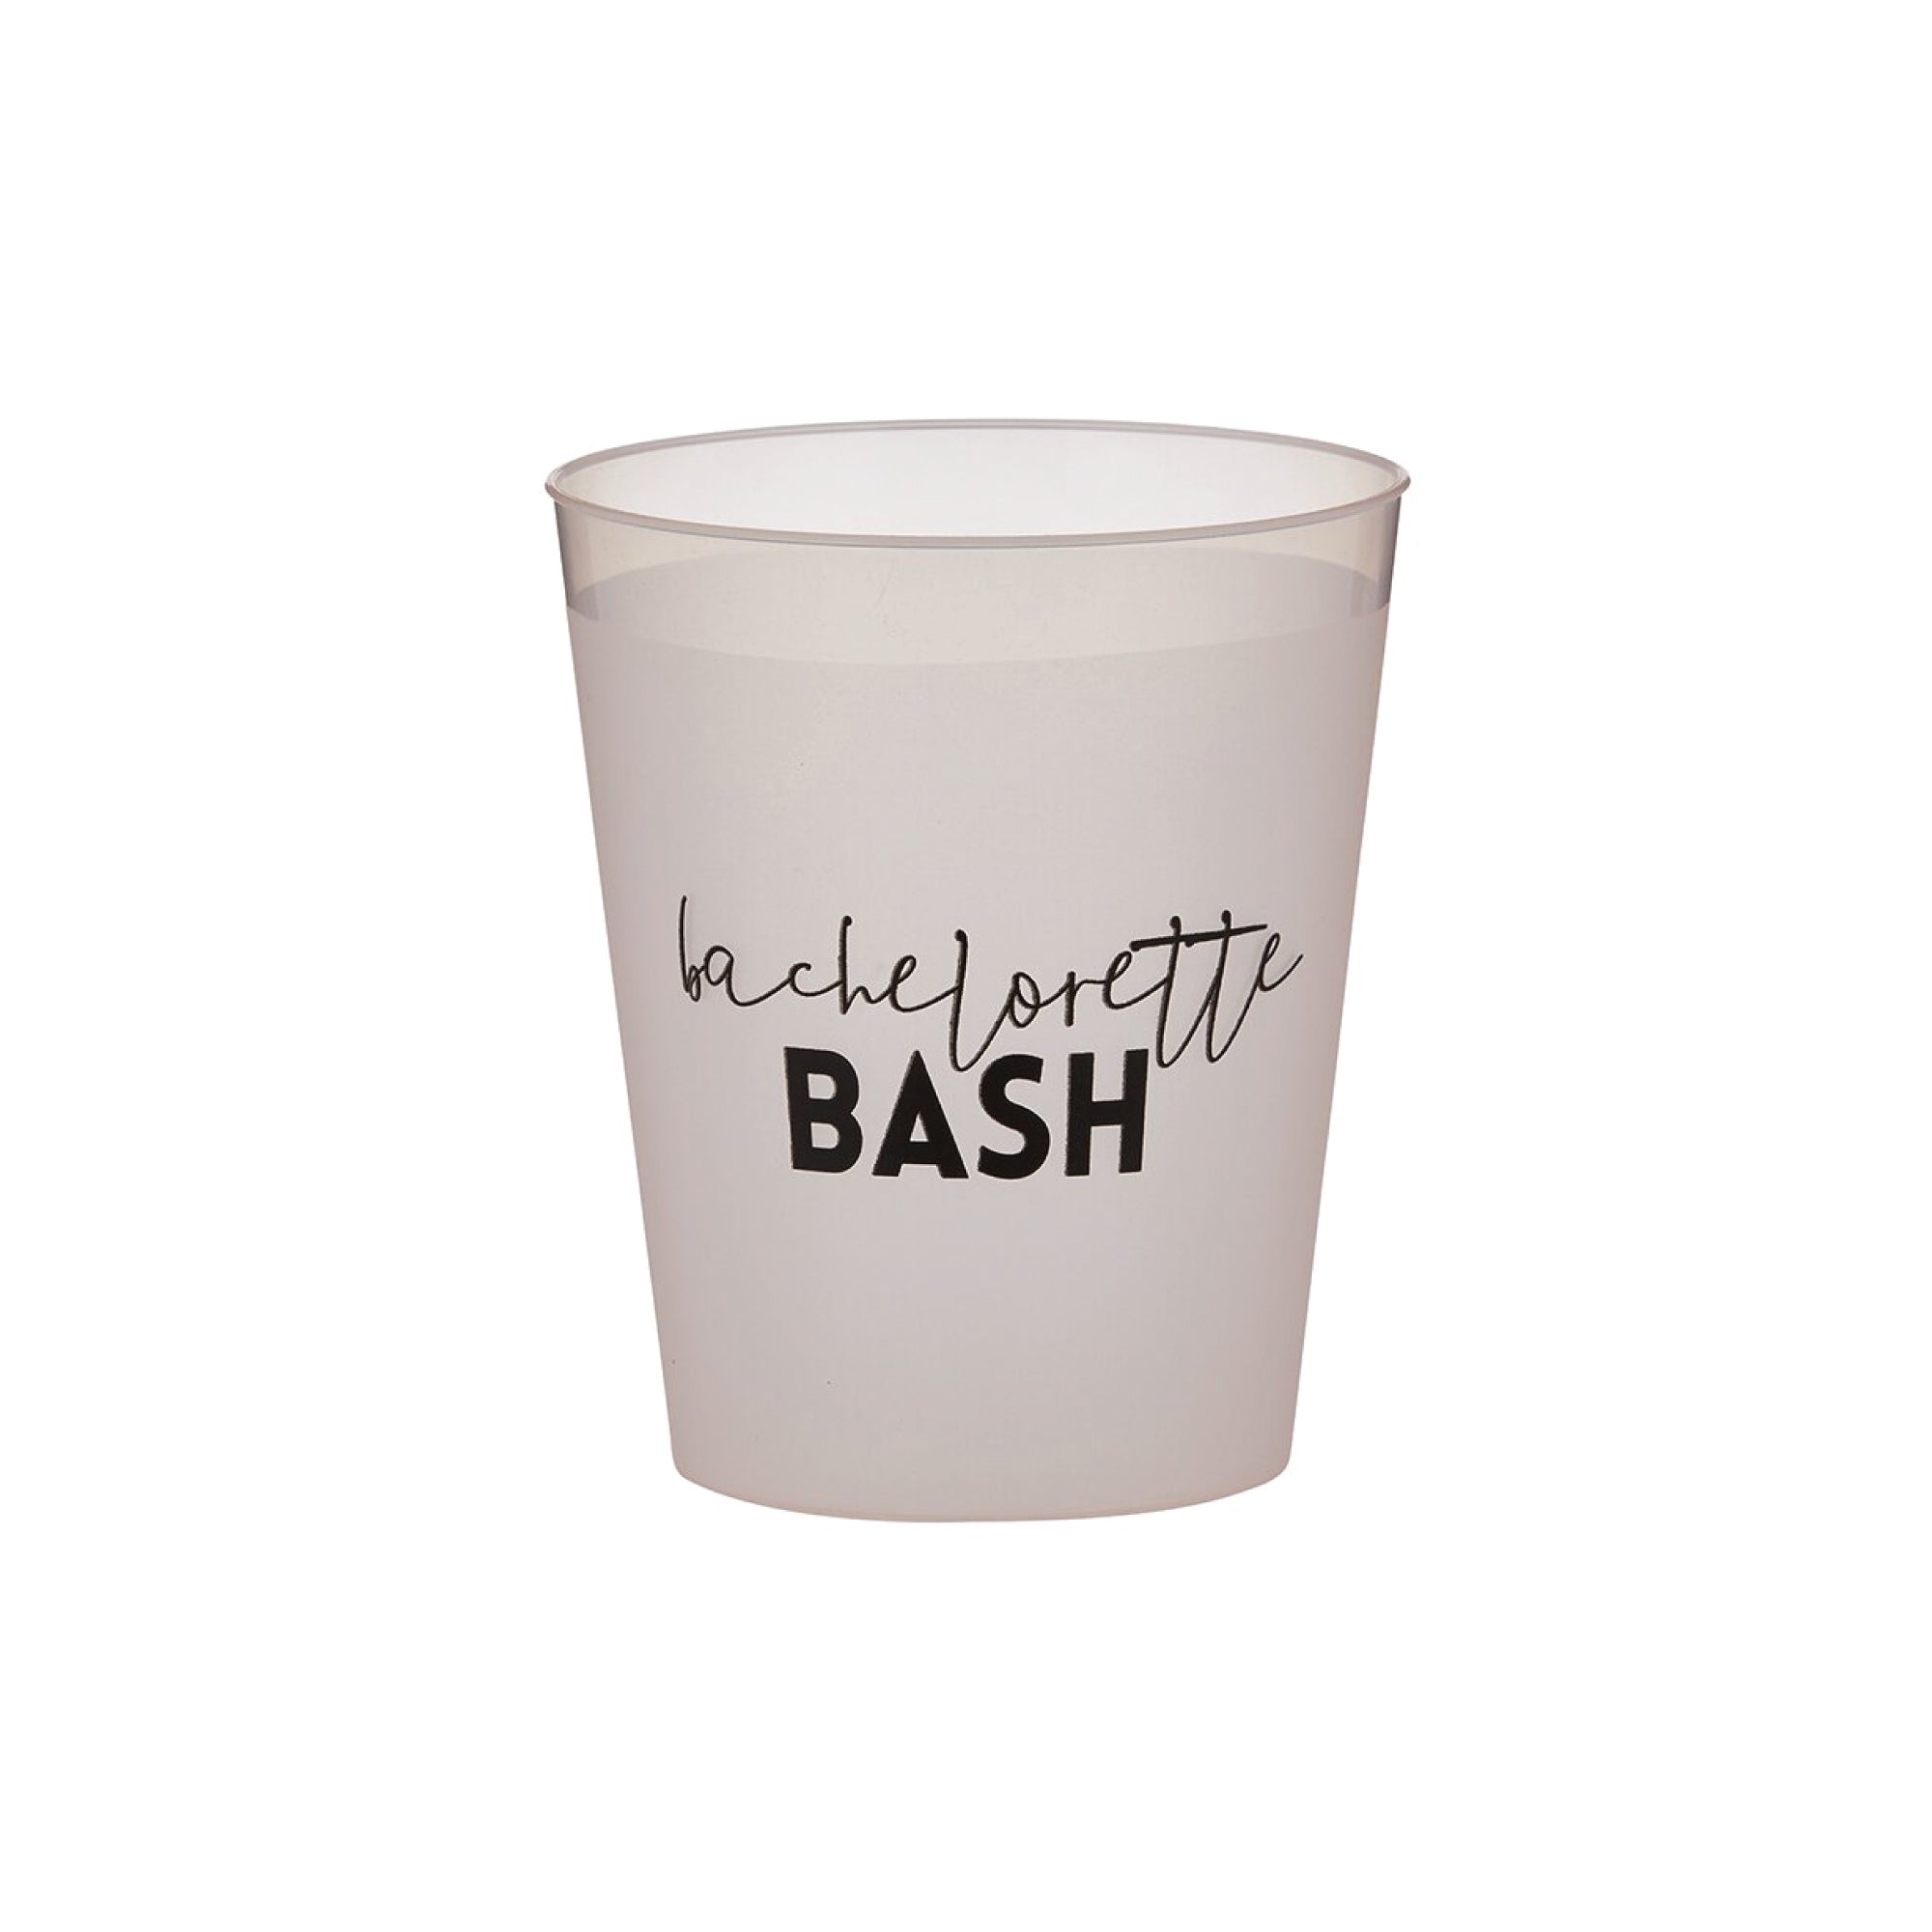 https://cdn.shopify.com/s/files/1/1449/4112/products/Bachelorette-Bash-Frosted-Cups-8ct_2000x.jpg?v=1681840684